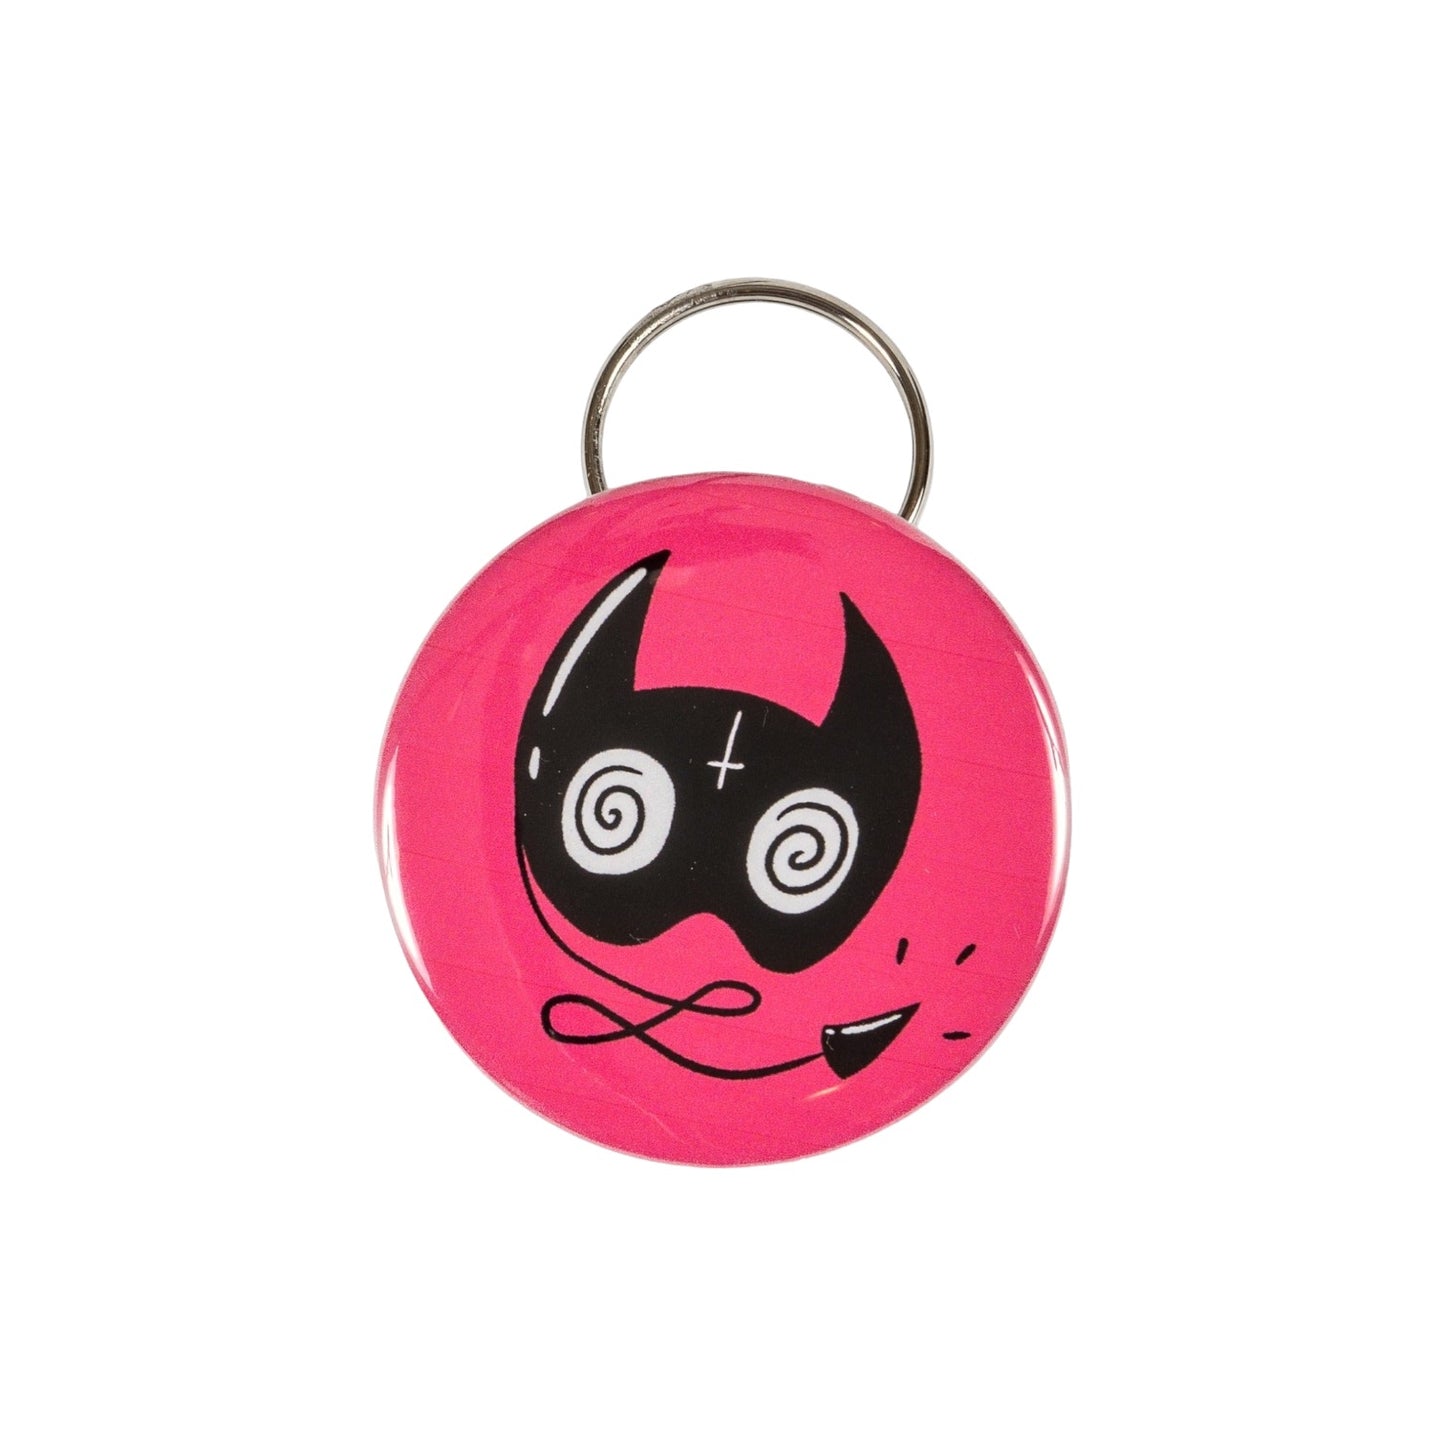 Combo keychain and bottle opener with a sassy cat mask on pink